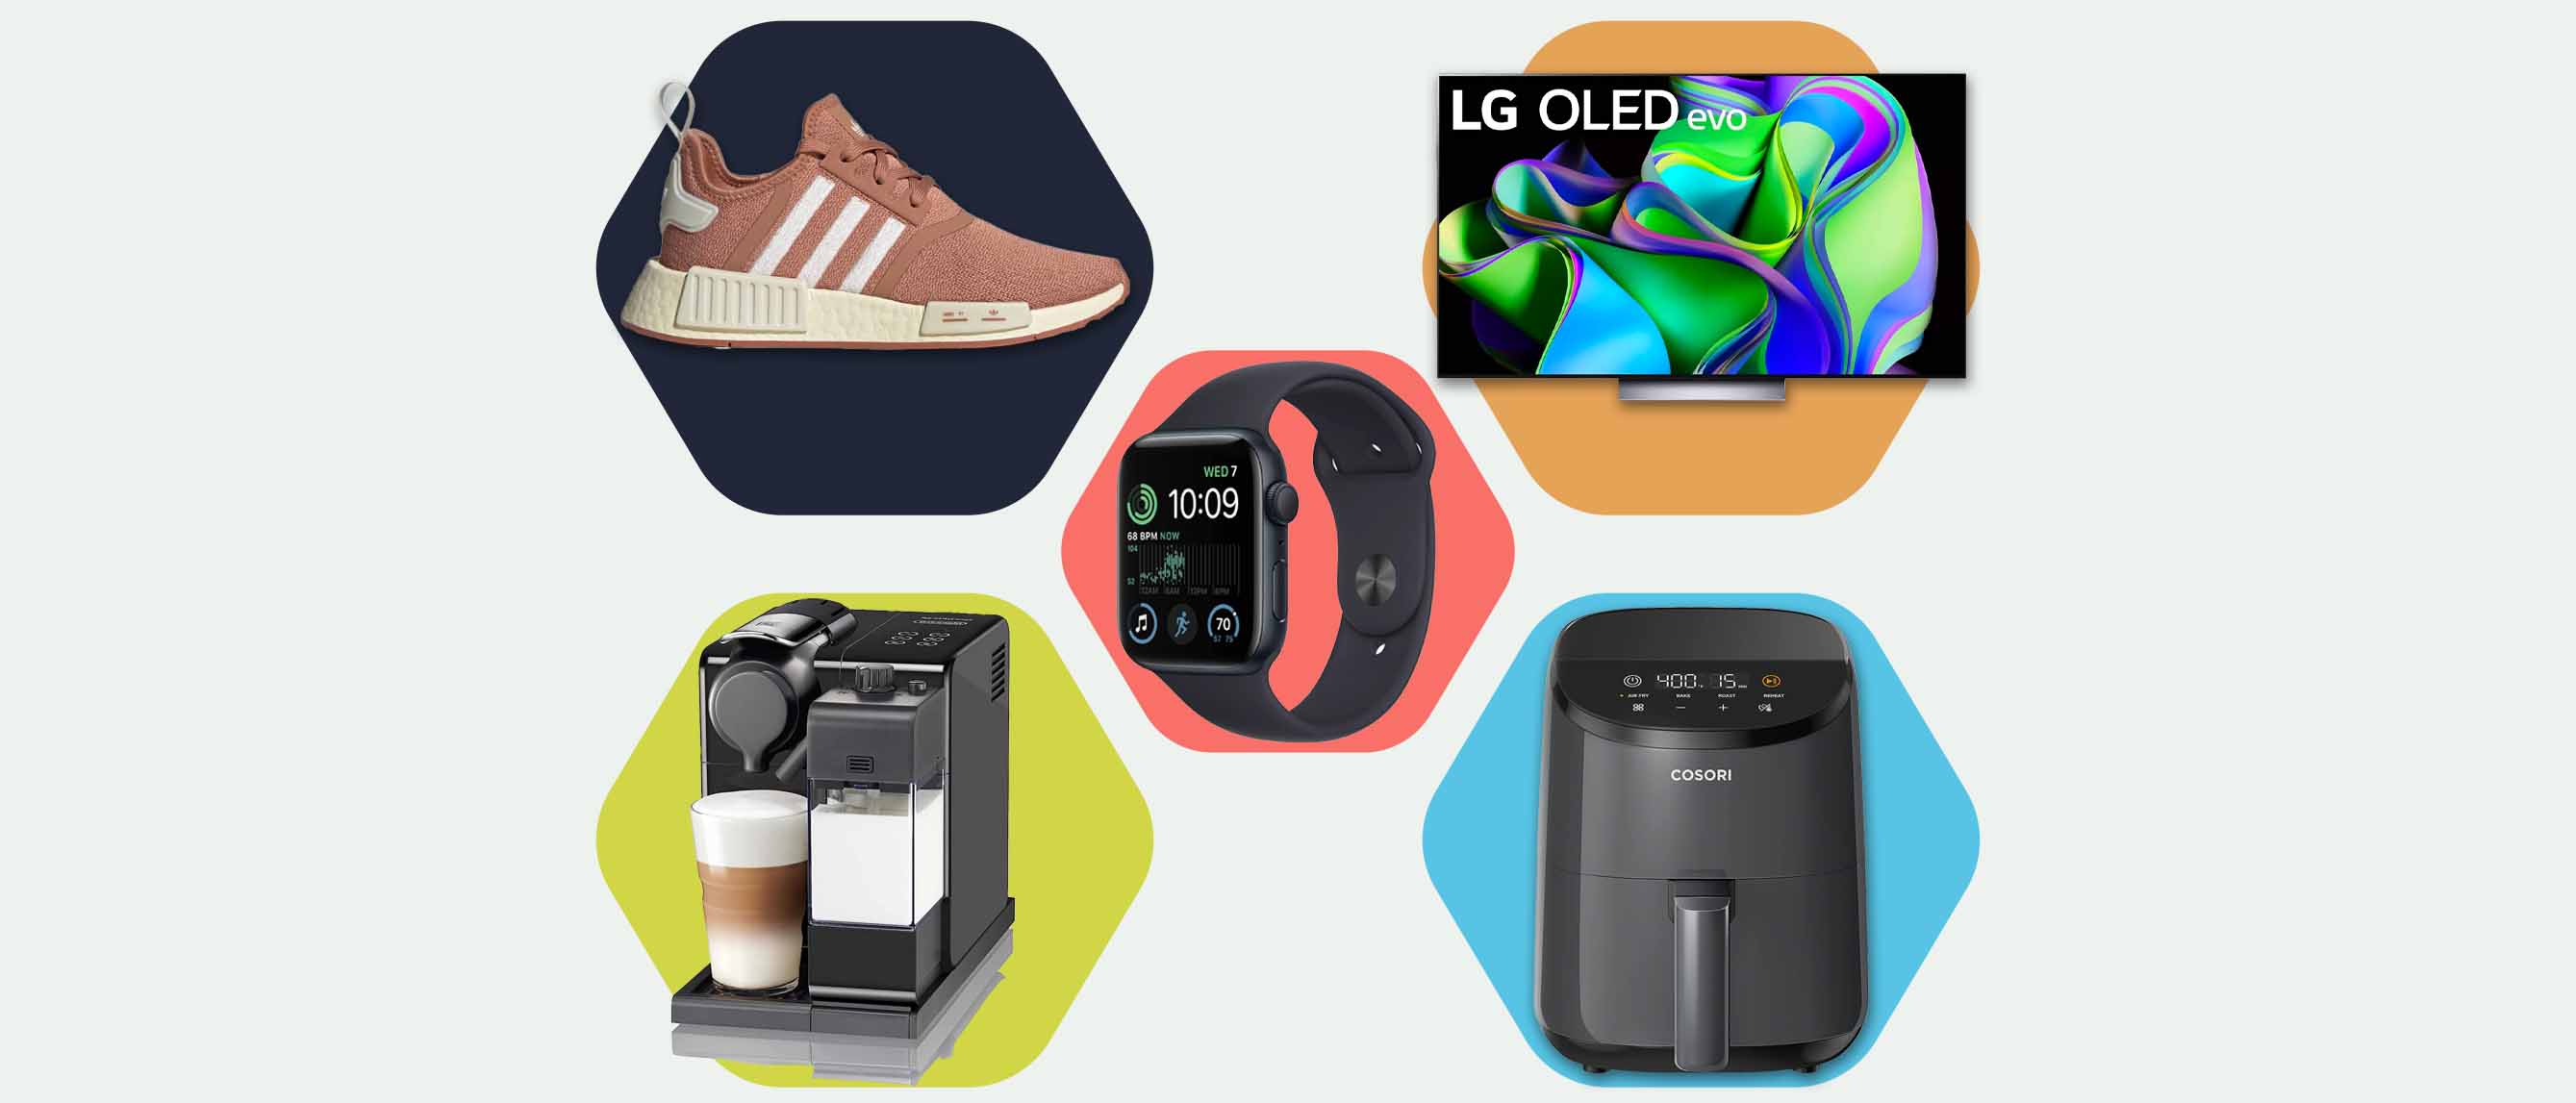 A variety of products for Black Friday, including shoes, a TV, air fryer, Apple watch and a Nespresso machine